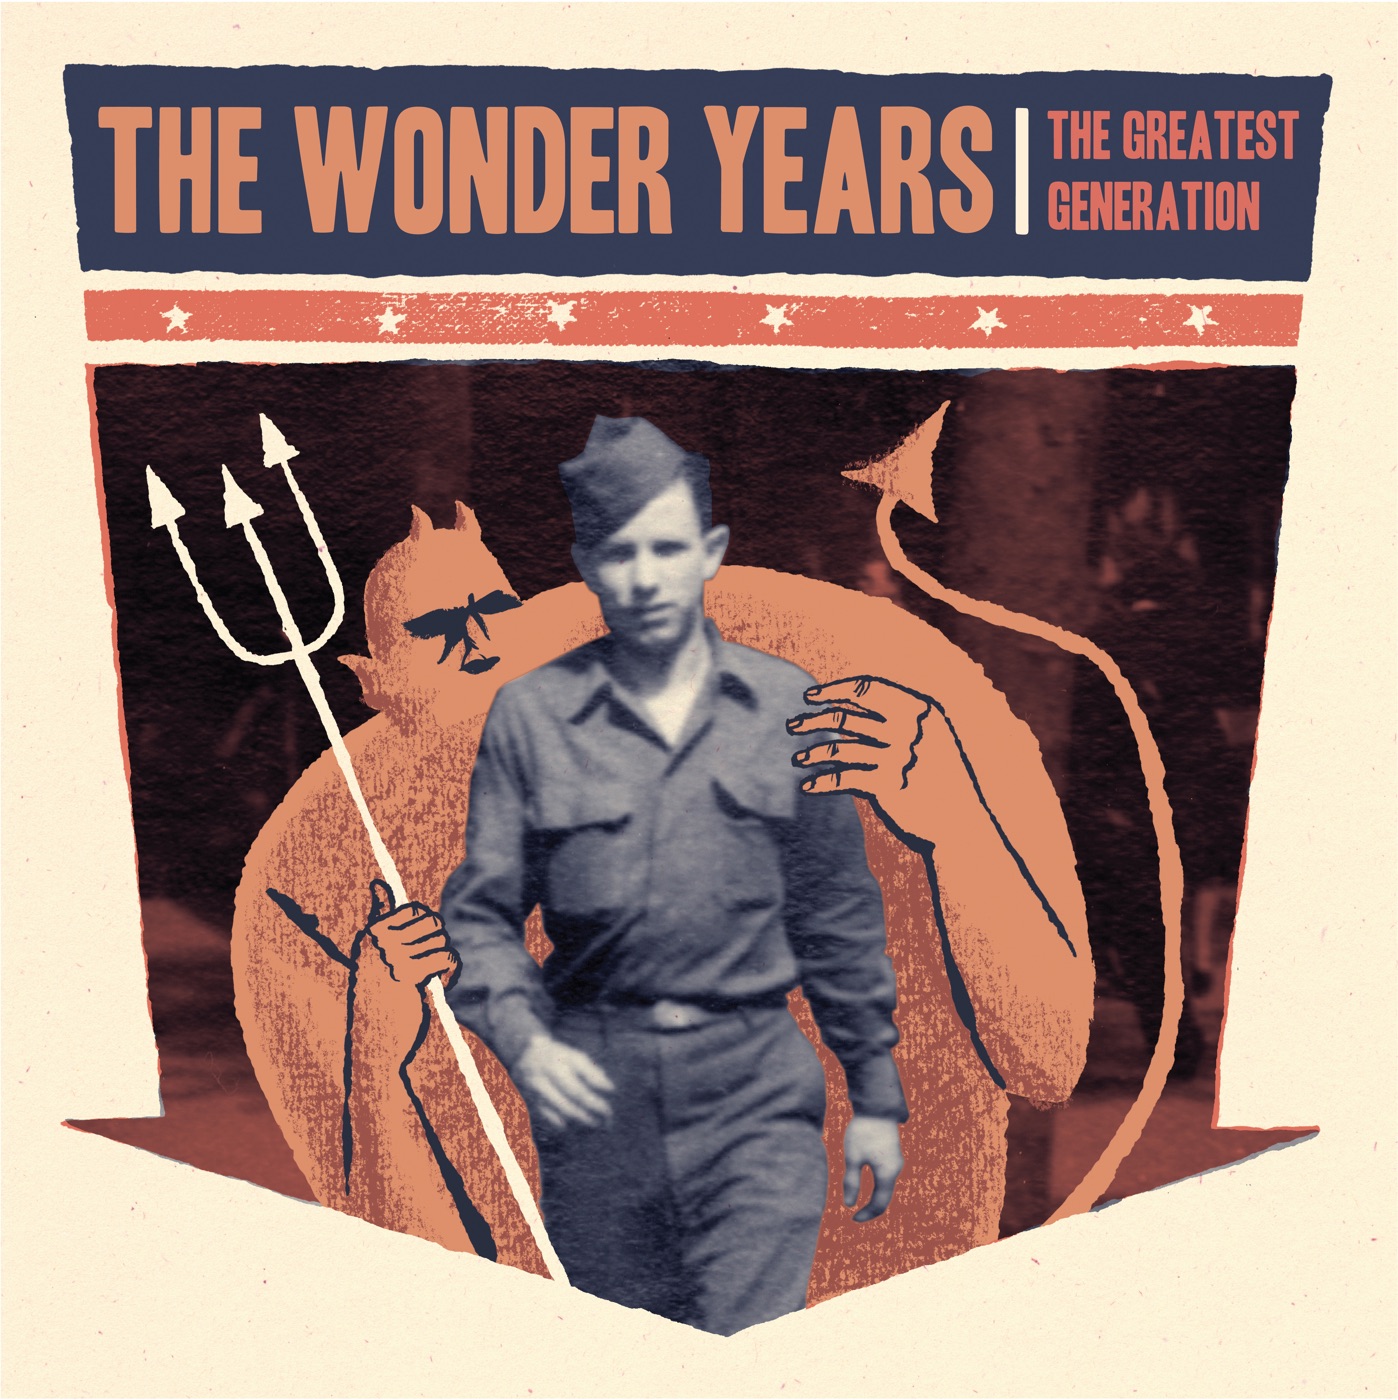 The Greatest Generation by The Wonder Years